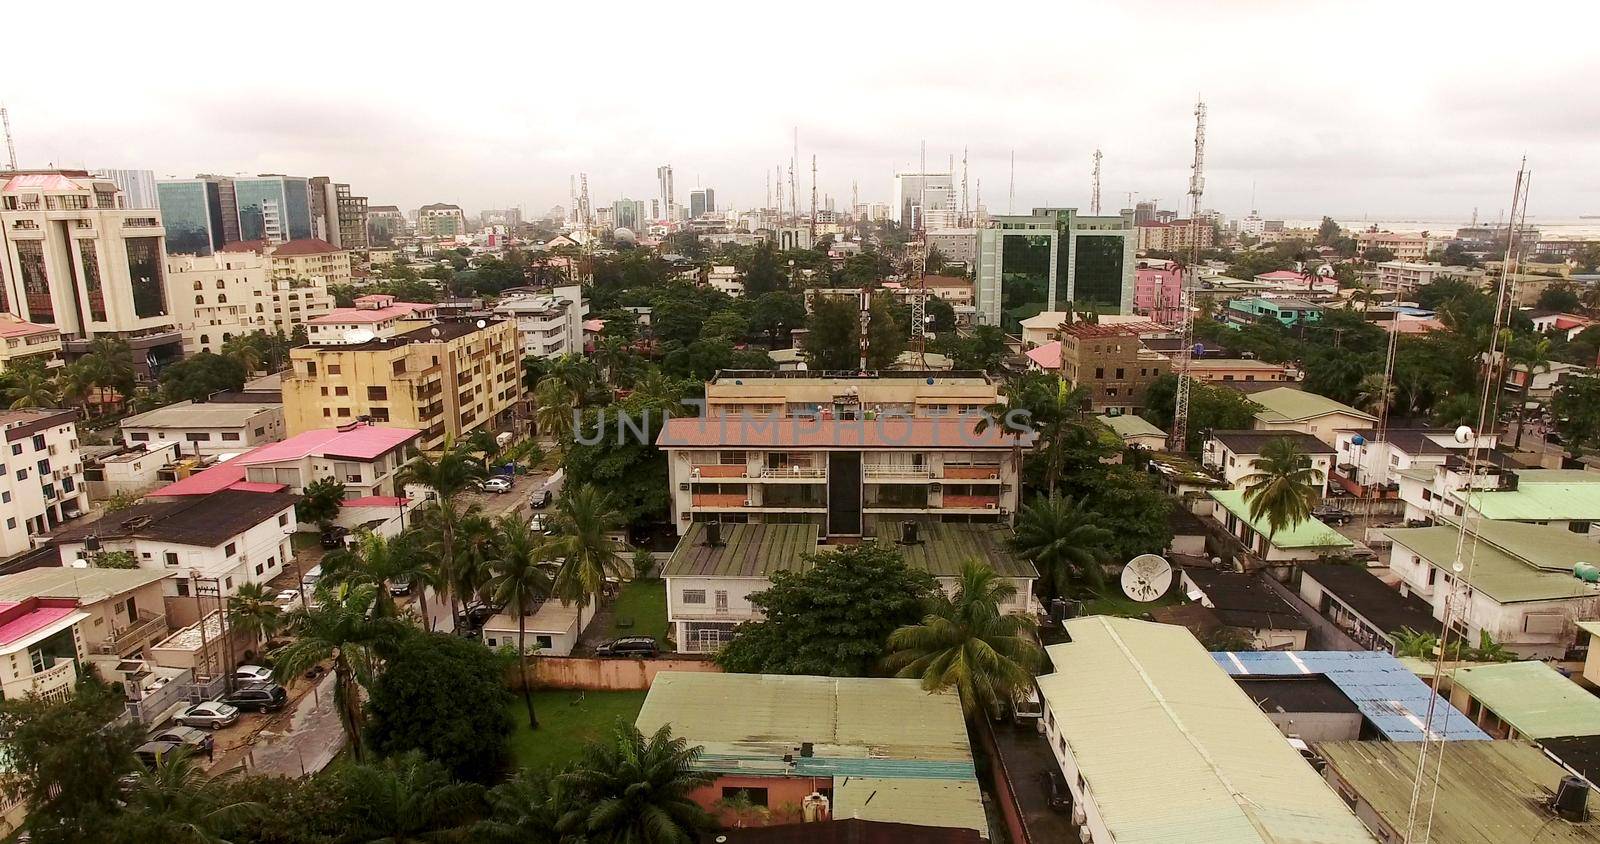 Aerial view of Lagos,Nigeria by fivepointsix